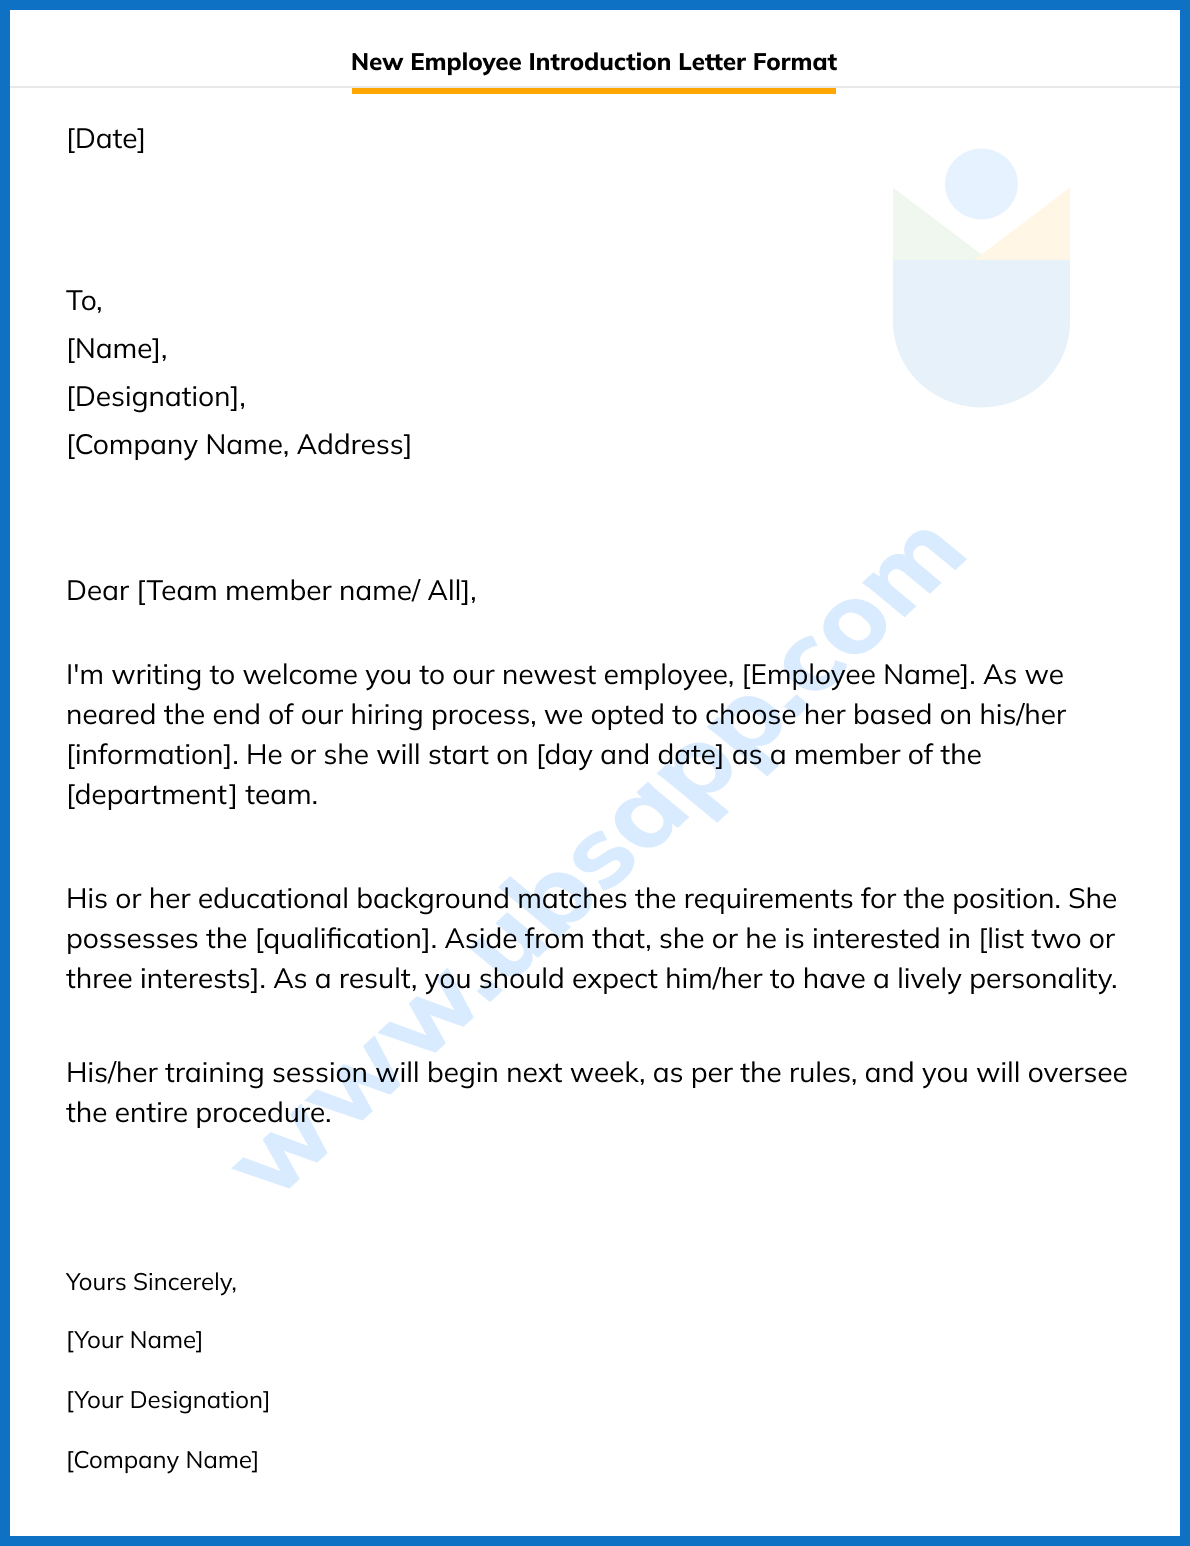 New Employee Introduction Letter Format